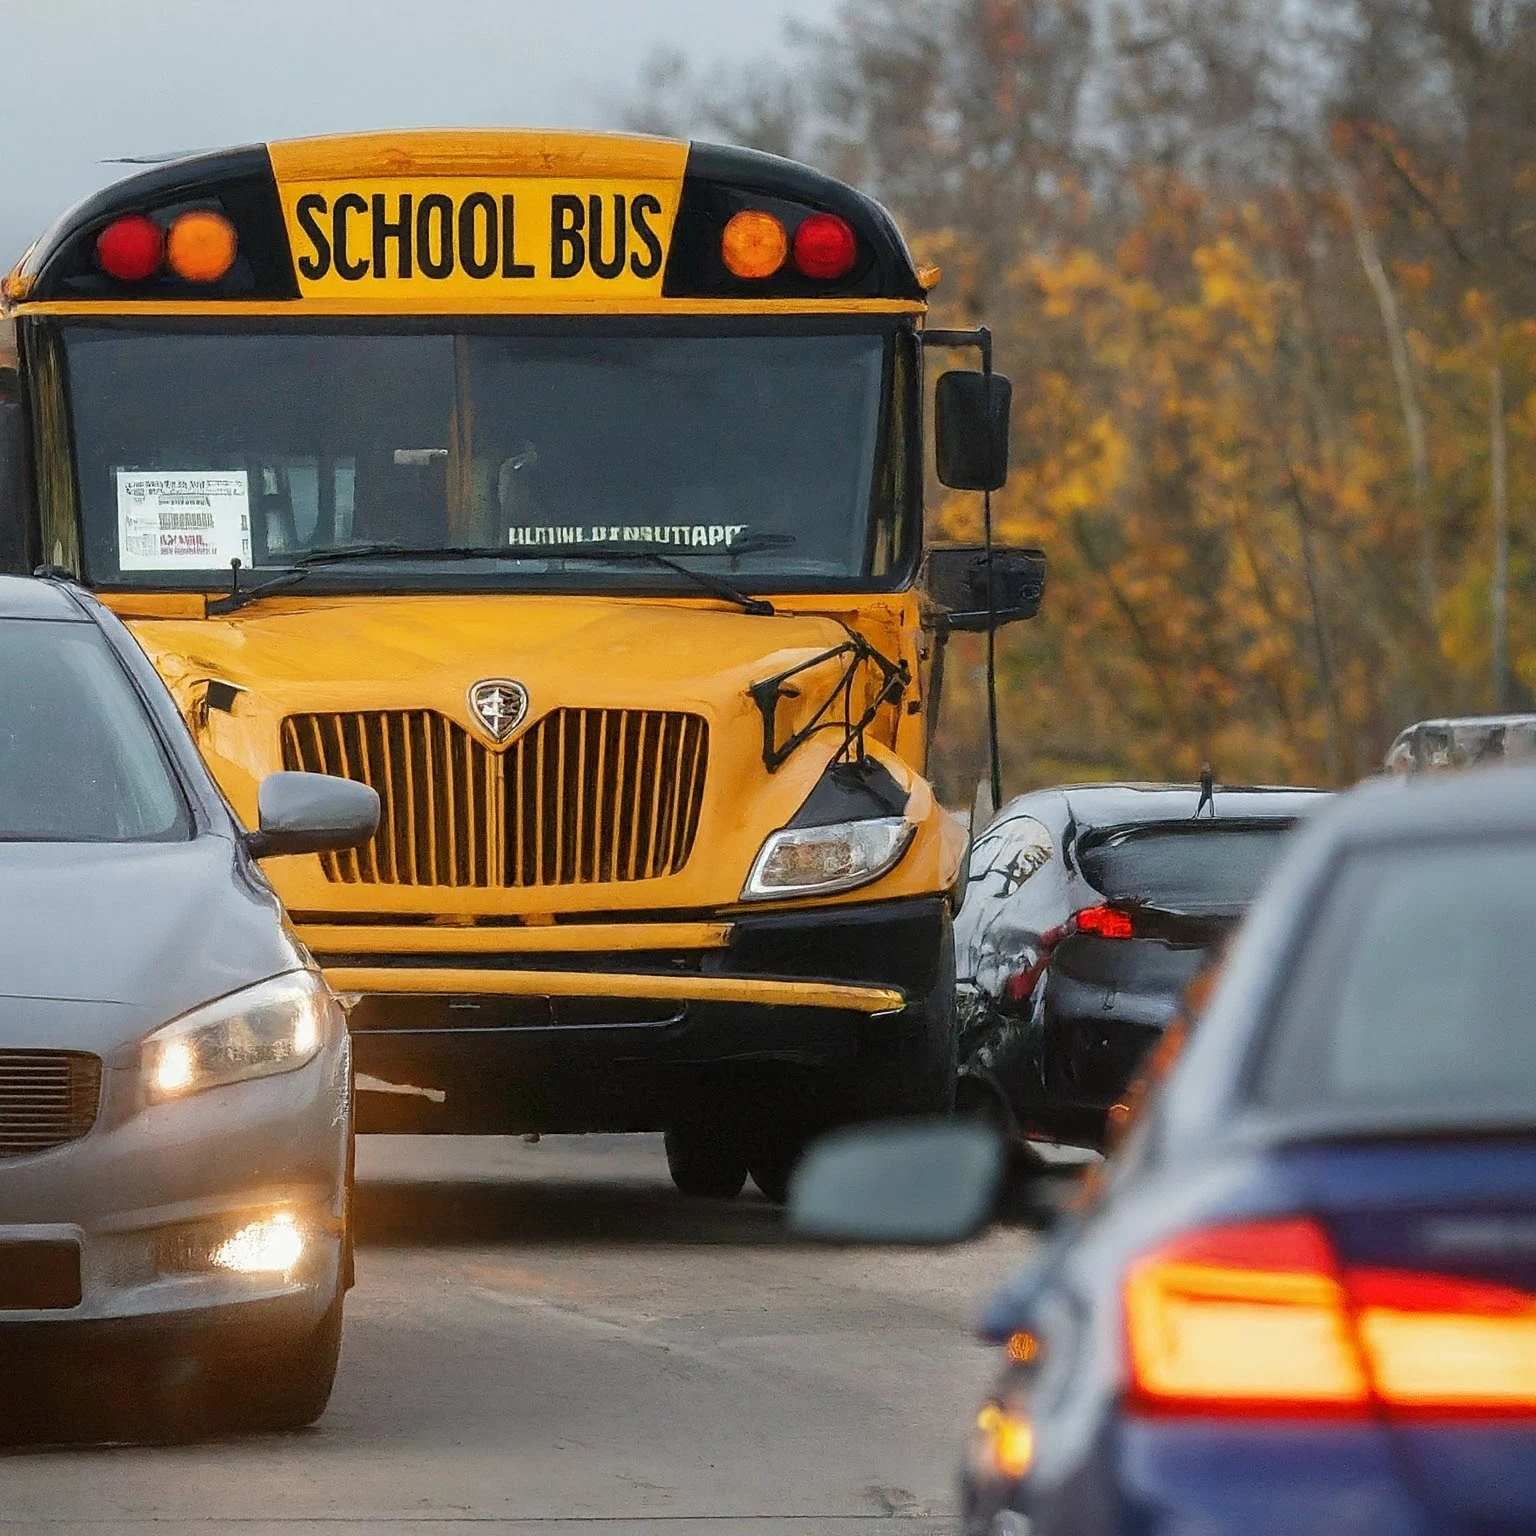 School Bus Flashing Lights: What to Do (Ultimate Guide for Drivers)